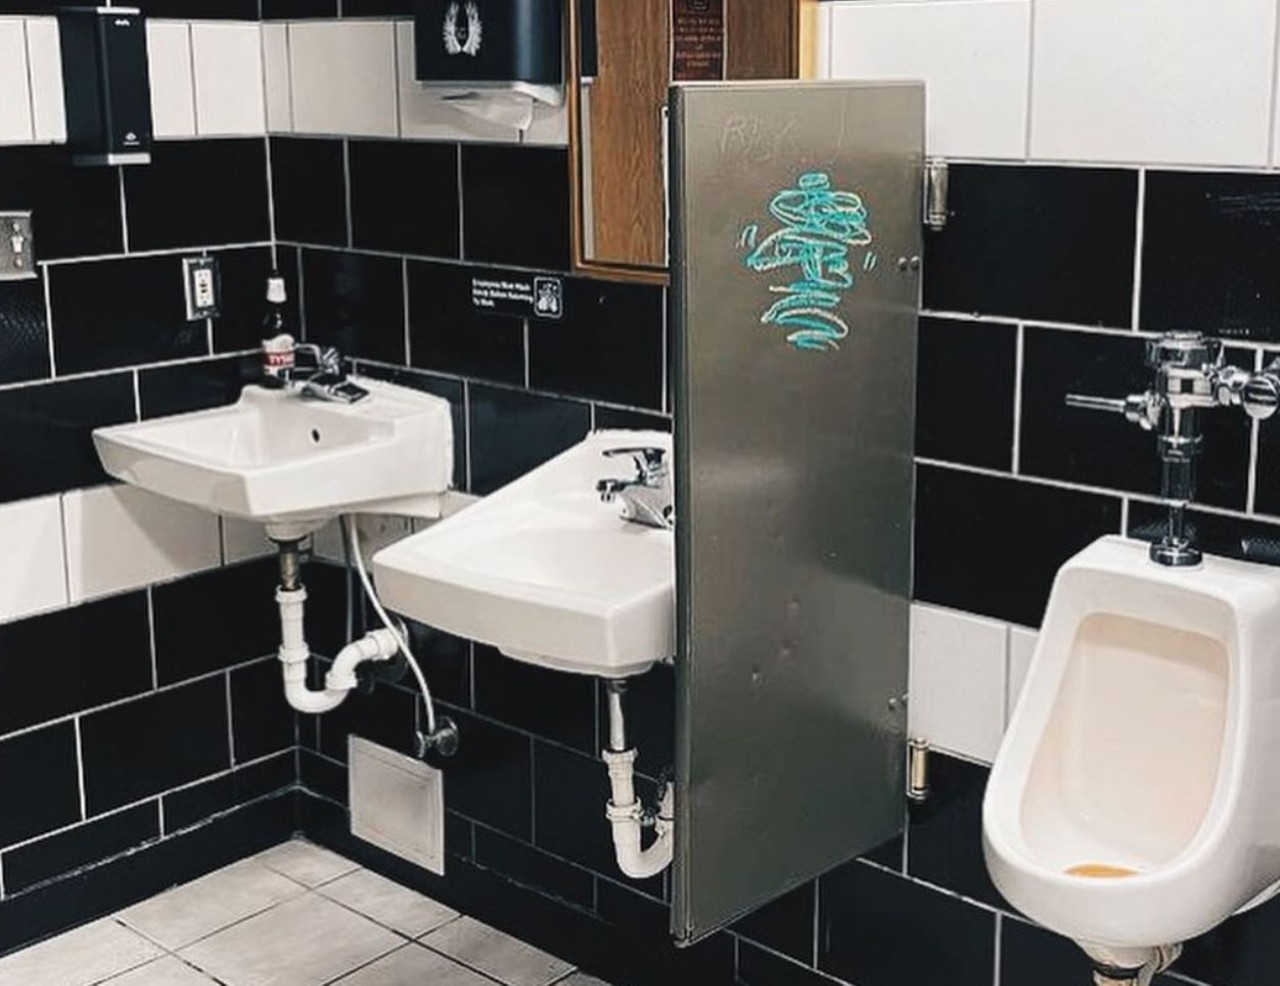 New Dodge Lounge
8850 Joseph Campau St., Hamtramck
“best bathroom. never pee on the walls,” @tiffadelic on Instagram said simply about this bar.